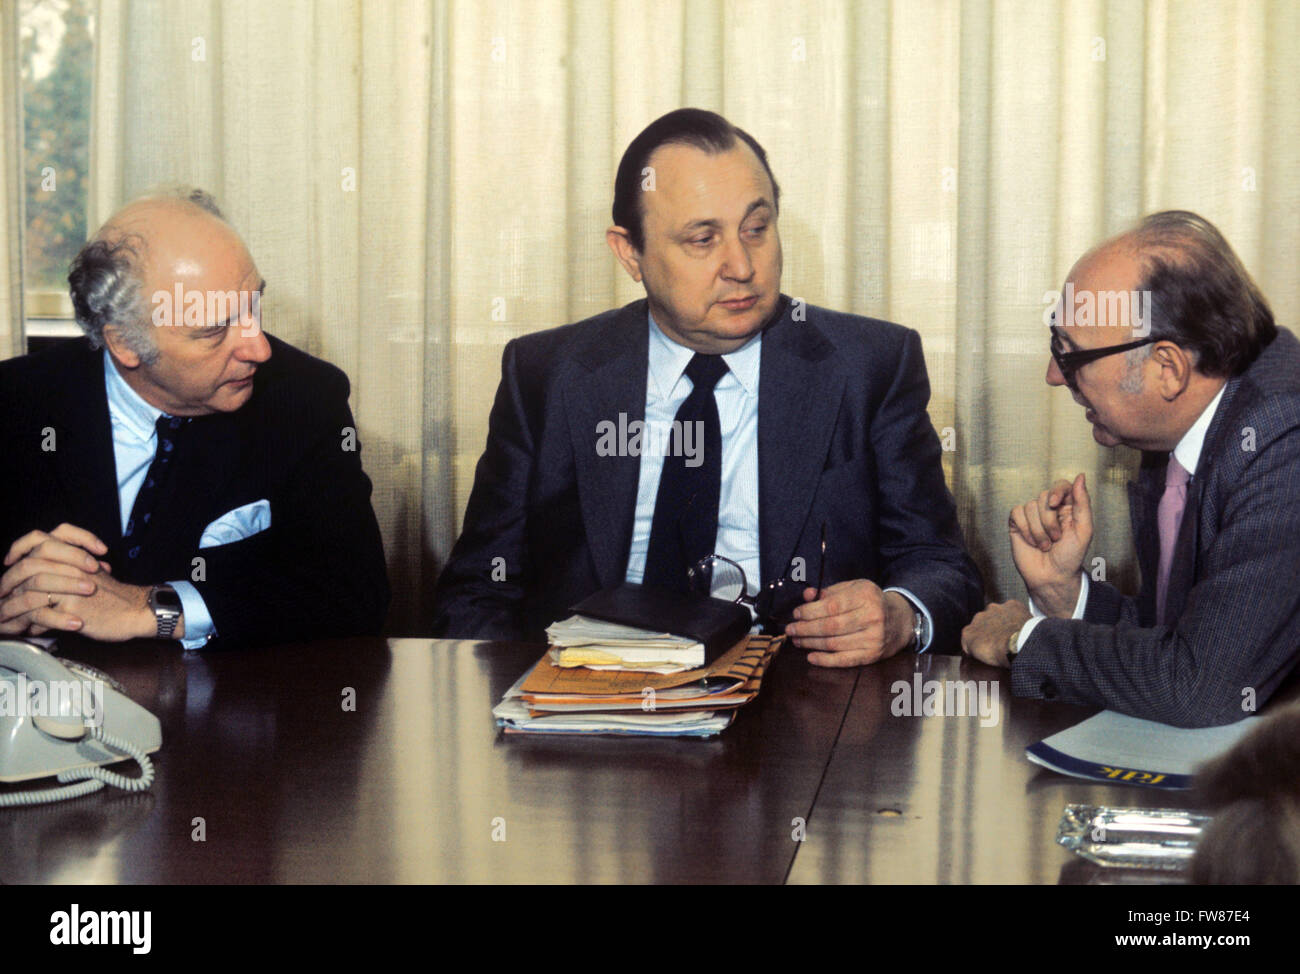 Federal Minister of Interior Hans-Dietrich Genscher (m) with Federal Minister and FDP fellow party member Walter Scheel (l) and chairman of FDP Bundestag faction, Wolfgang Mischnick (r), at a conference of FDP federal executive board on 1st March 1974 in Bonn. Stock Photo